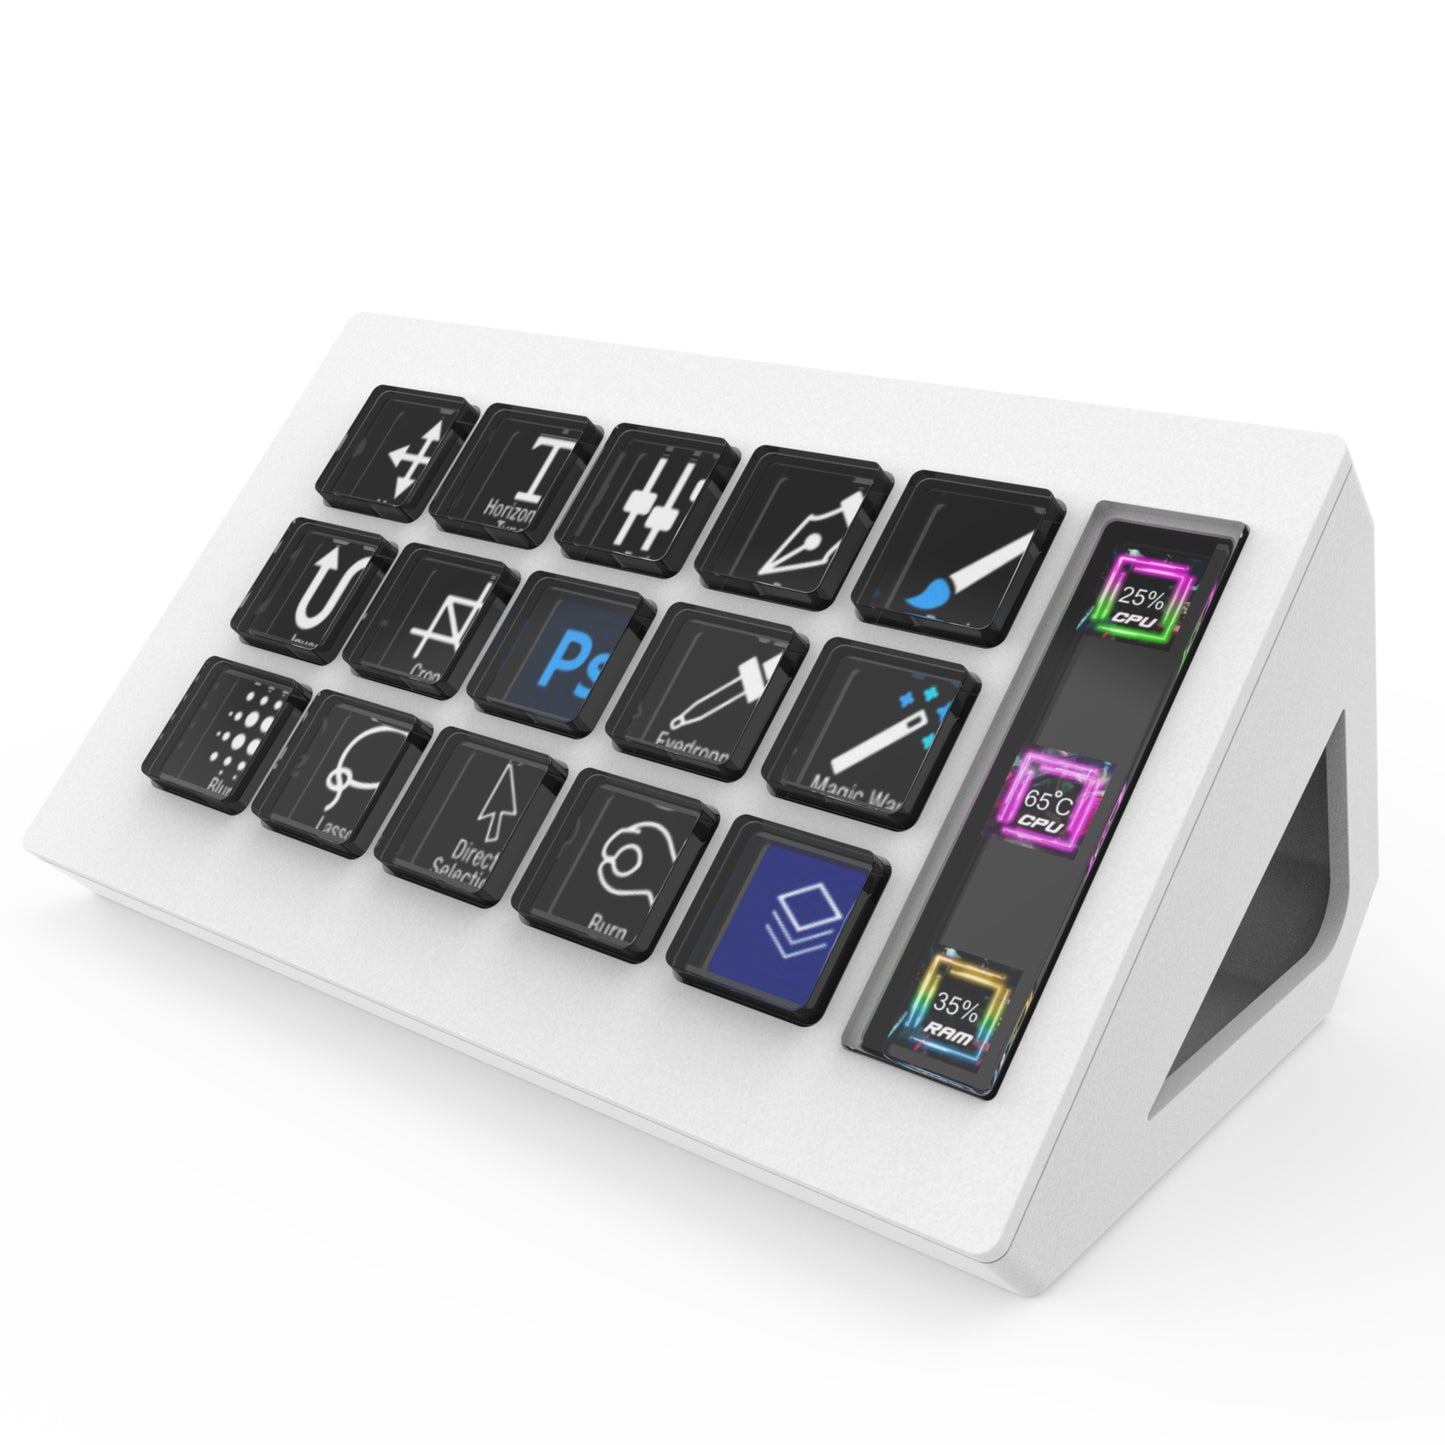 D15 Stream Dock Controller, Production Console for Livestream Audio Video Design, 15 Custom Macro LCD Keys, 1 Side Info Screen Display, Trigger Actions in OBS Studio Streamlabs Twitch YouTube